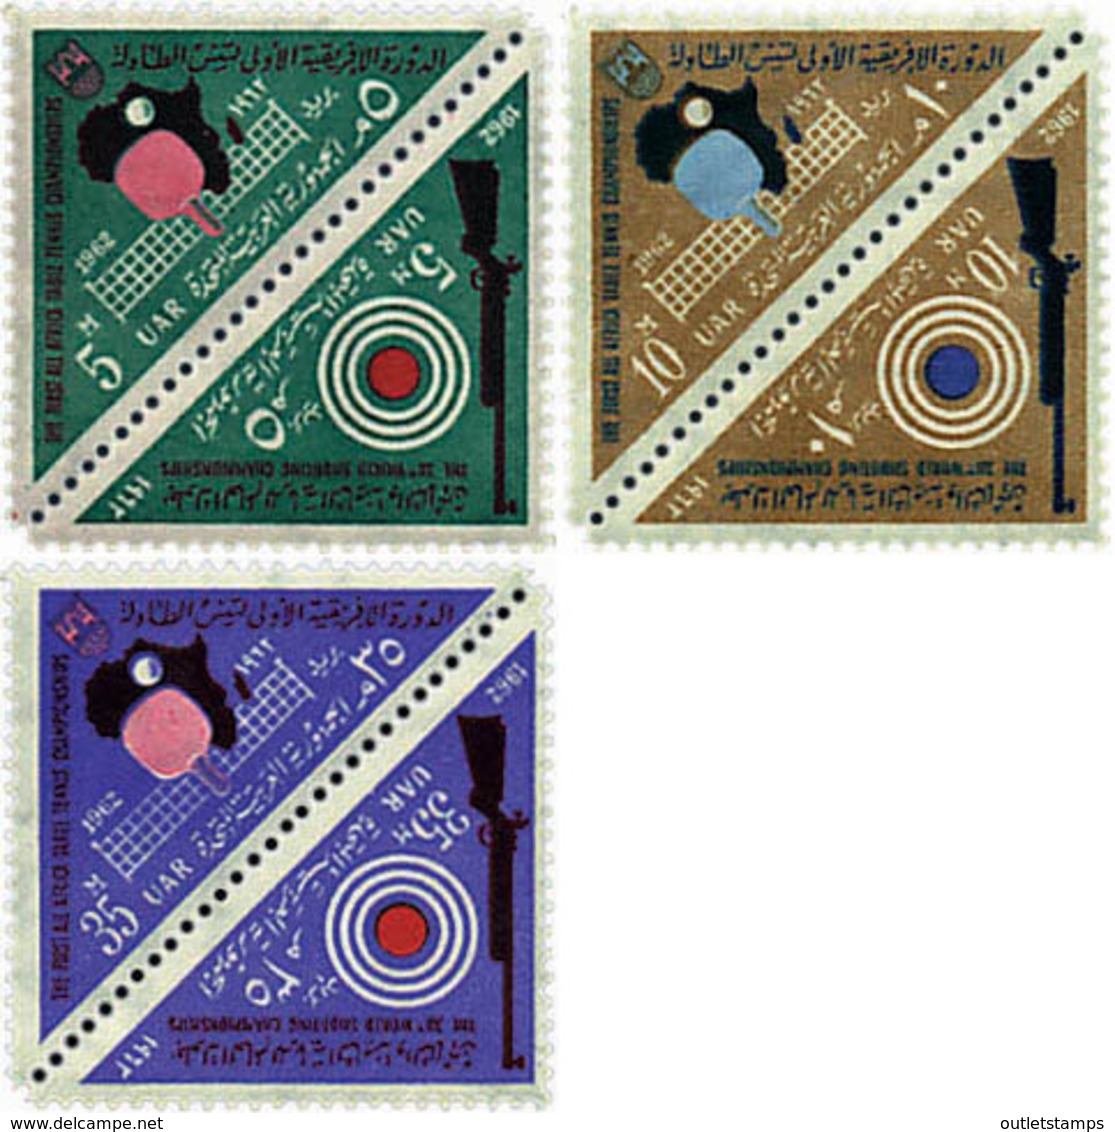 Ref. 229439 * NEW *  - EGYPT . 1962. 1st PING PONG AFRICAN CHAMPIONSHIP AND 38 SHOOTING SHAMPIONSHIP. 1 CAMPEONATO AFRIC - Nuevos